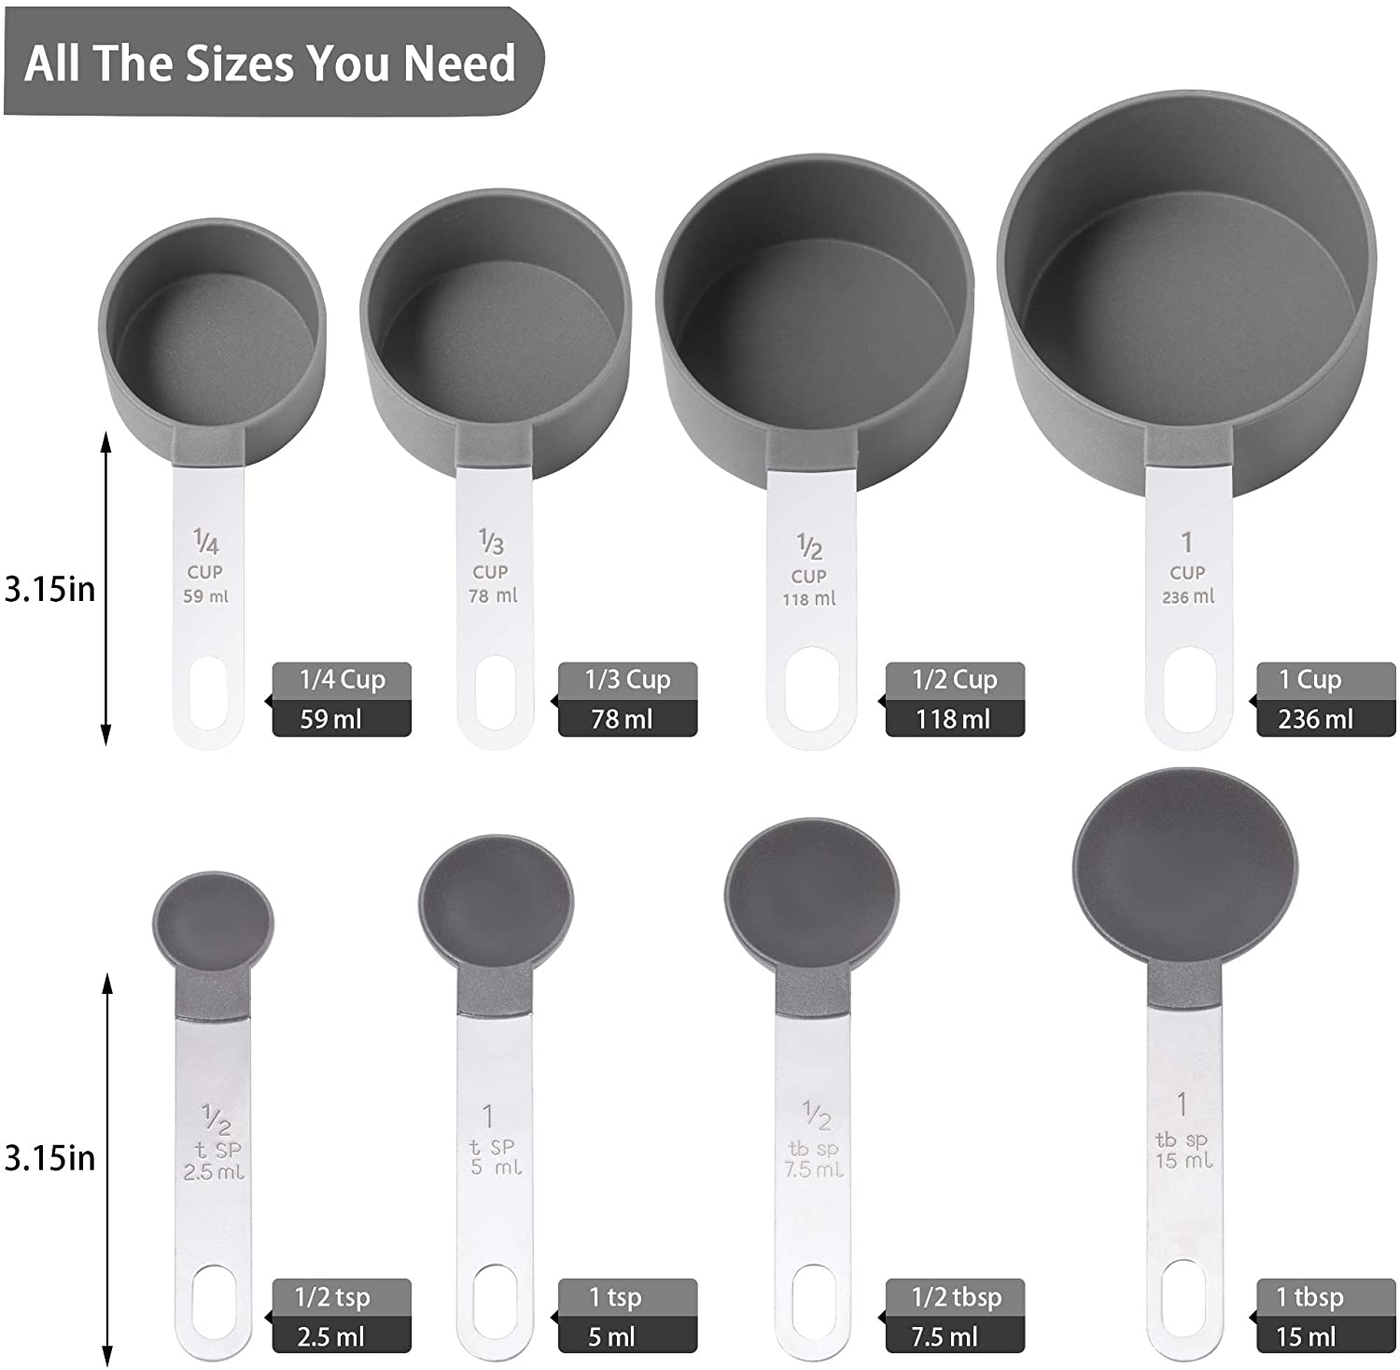 Measuring Cups and Spoons Set of Huygens Kitchen Gadgets 8 Pieces, Stackable Stainless Steel Handle Measuring Cups for Measuring Dry and Liquid Ingredient (Gray)